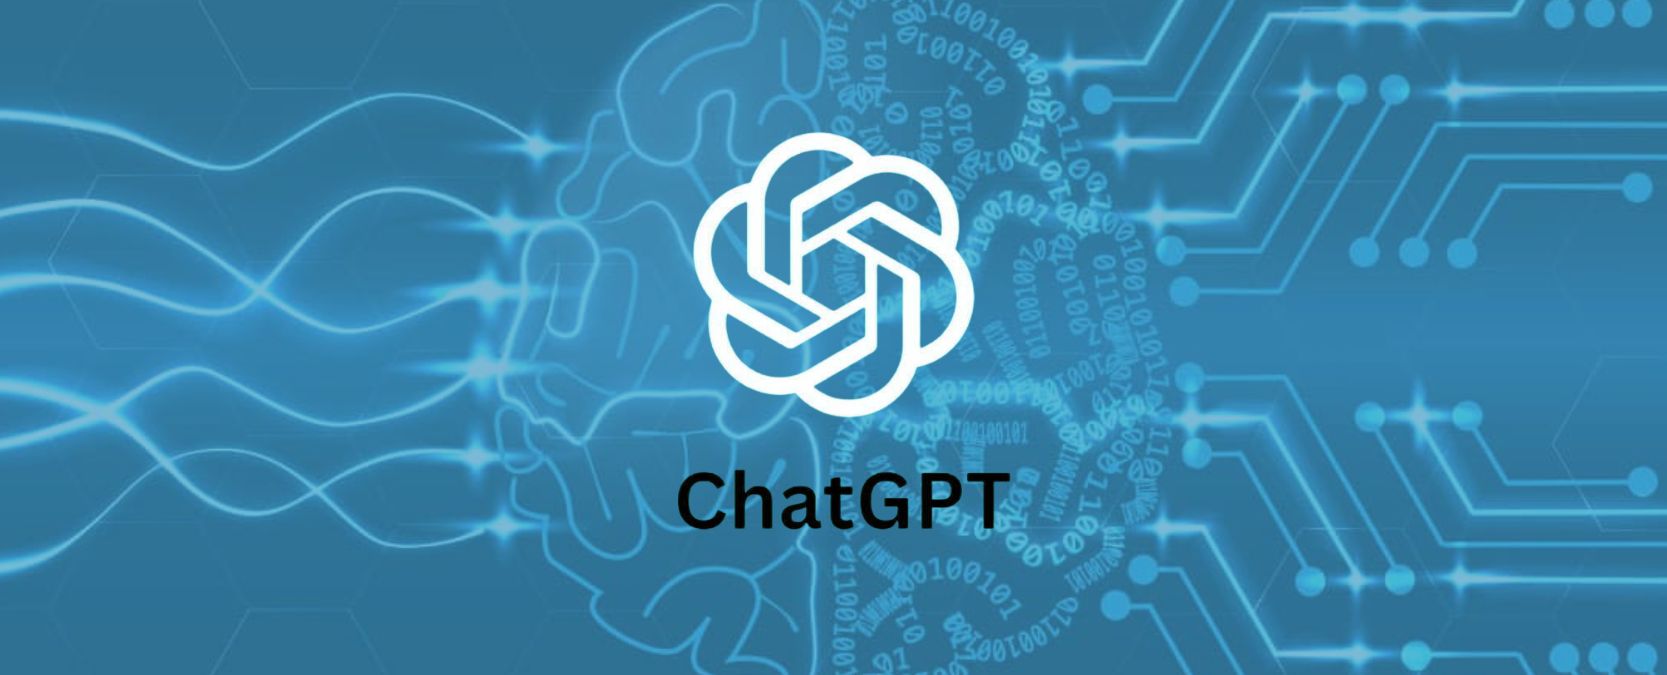 ChatGPT 101 guide